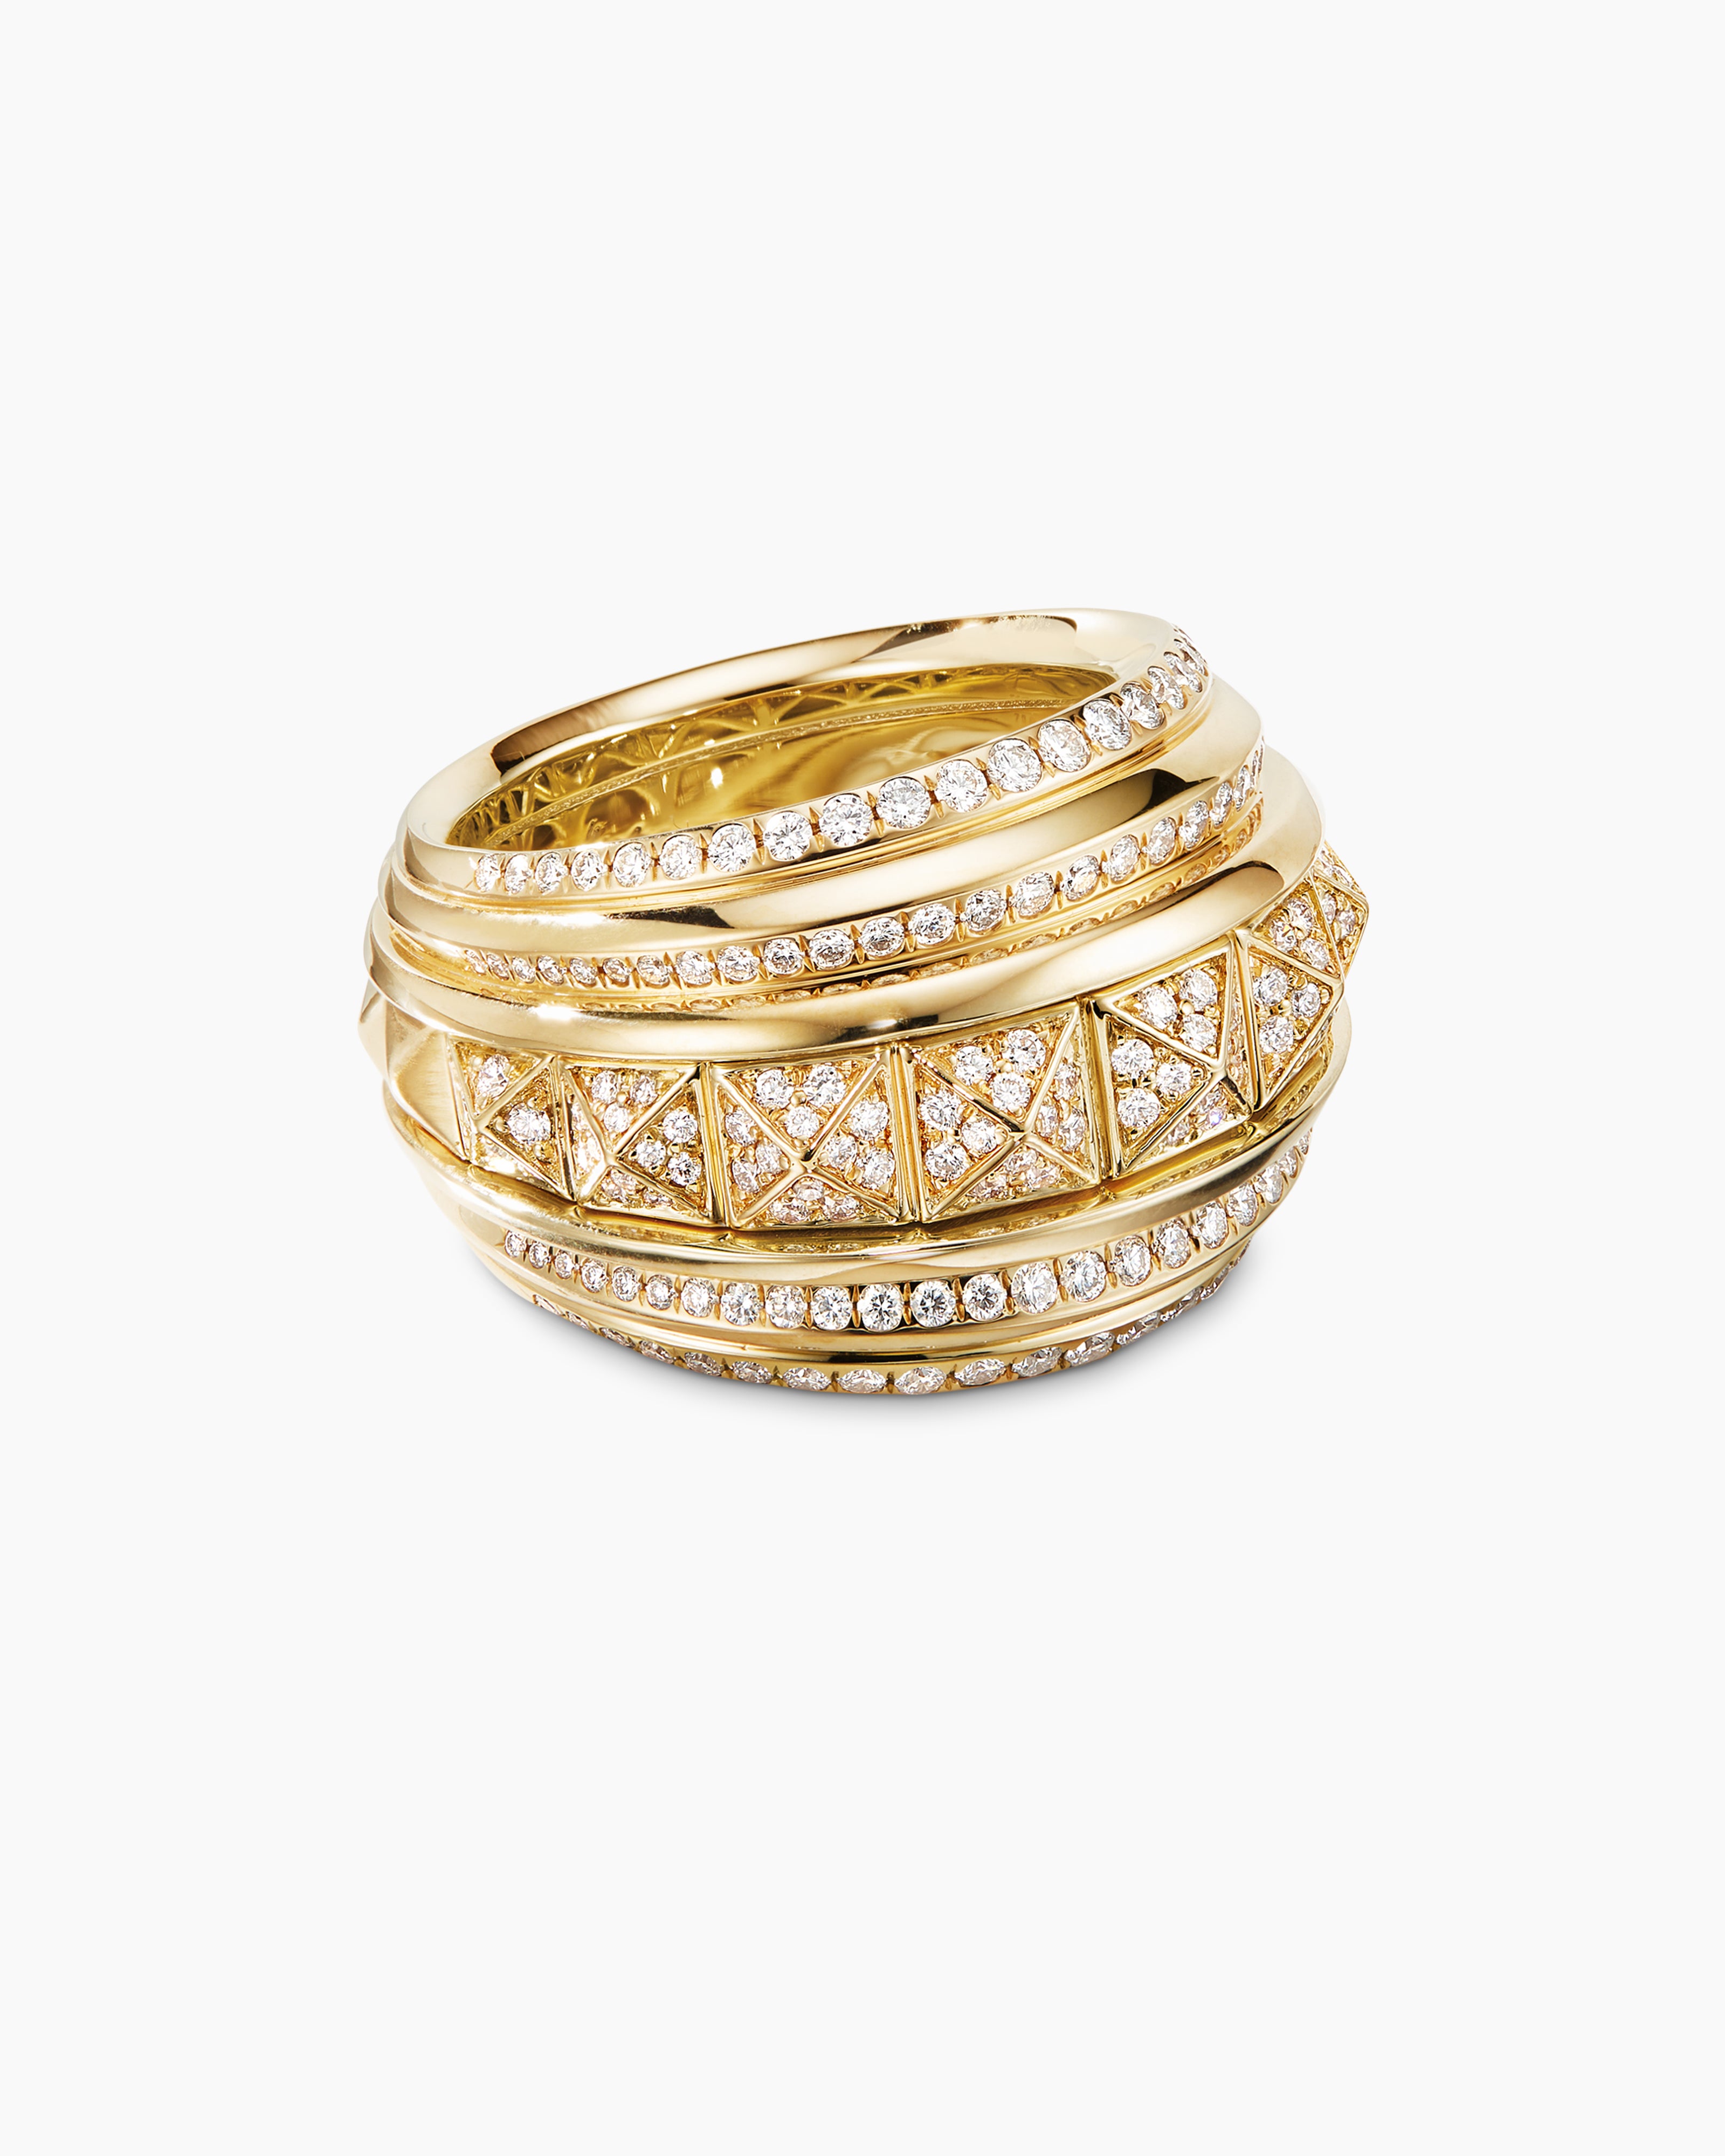 Modern Renaissance Ring in 18K Yellow Gold with Diamonds, 18.6mm